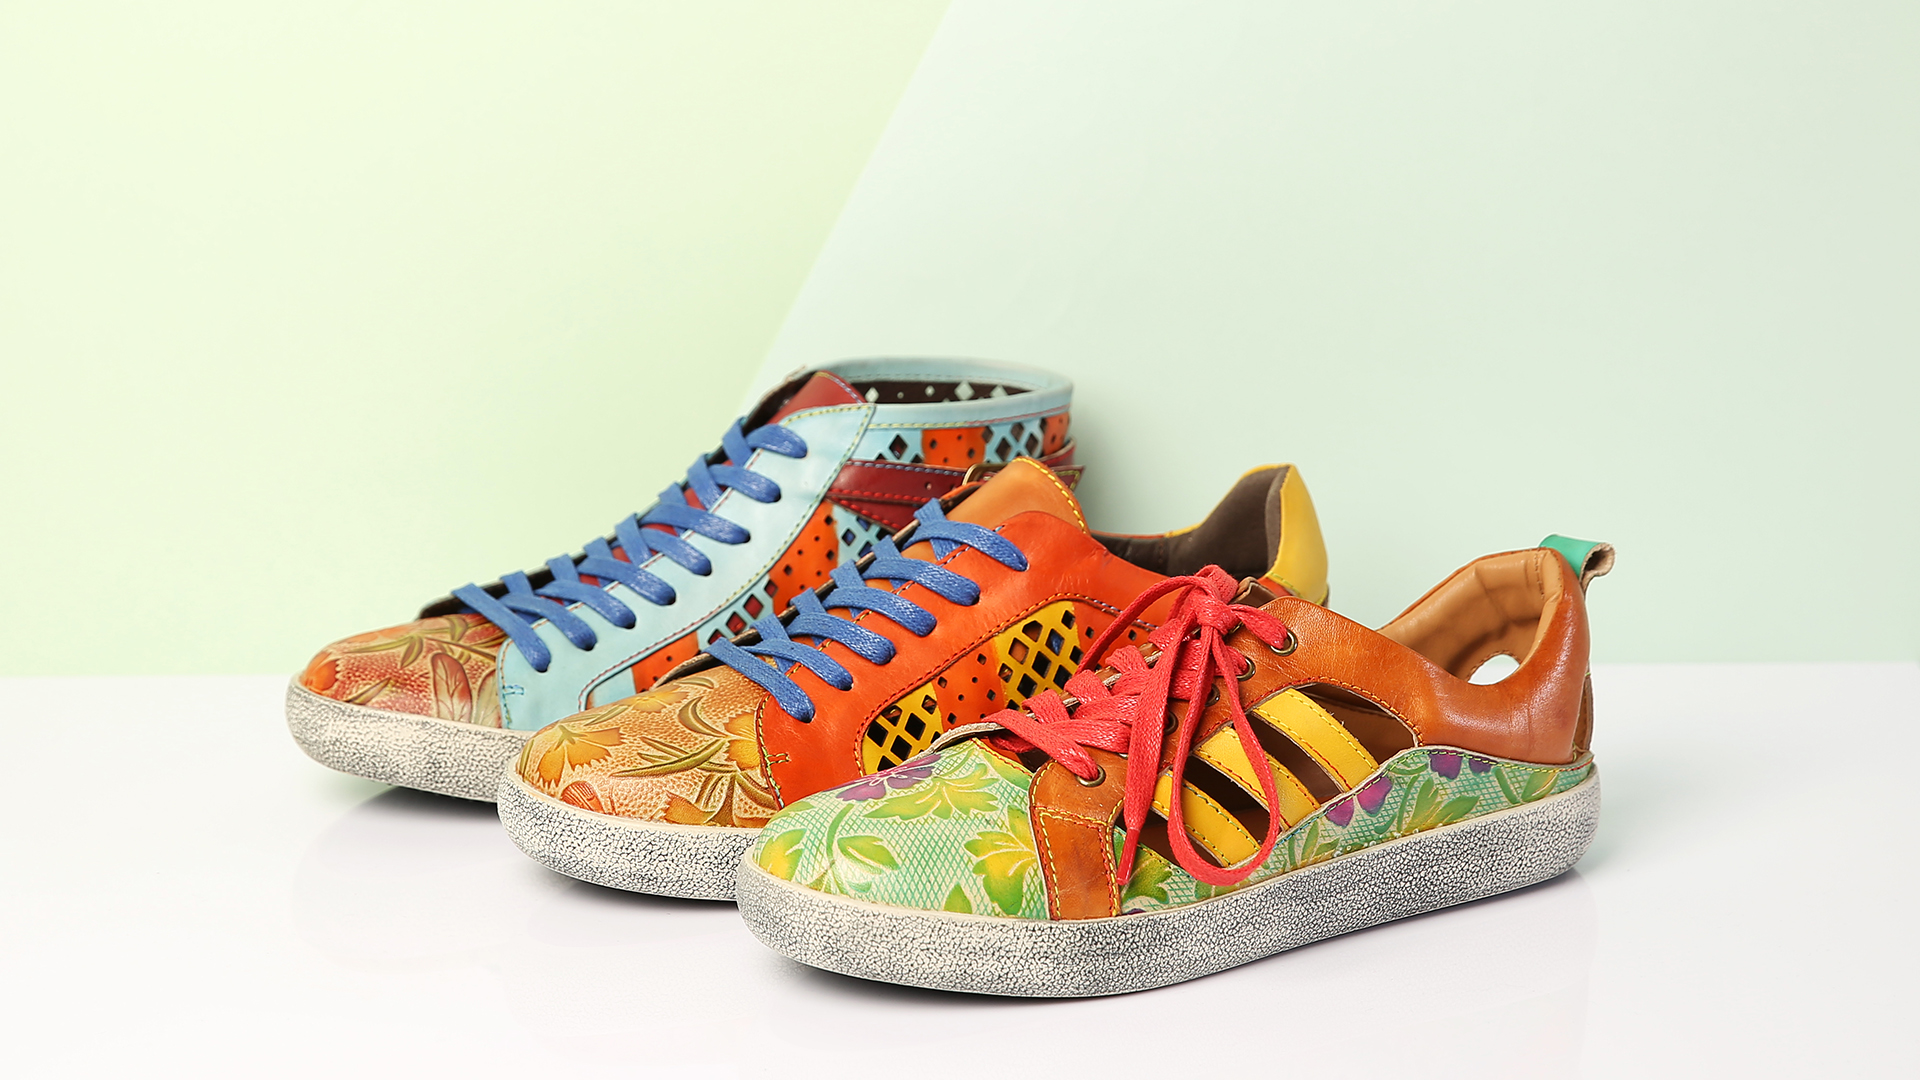 SOCOFY Colorful Sneakers